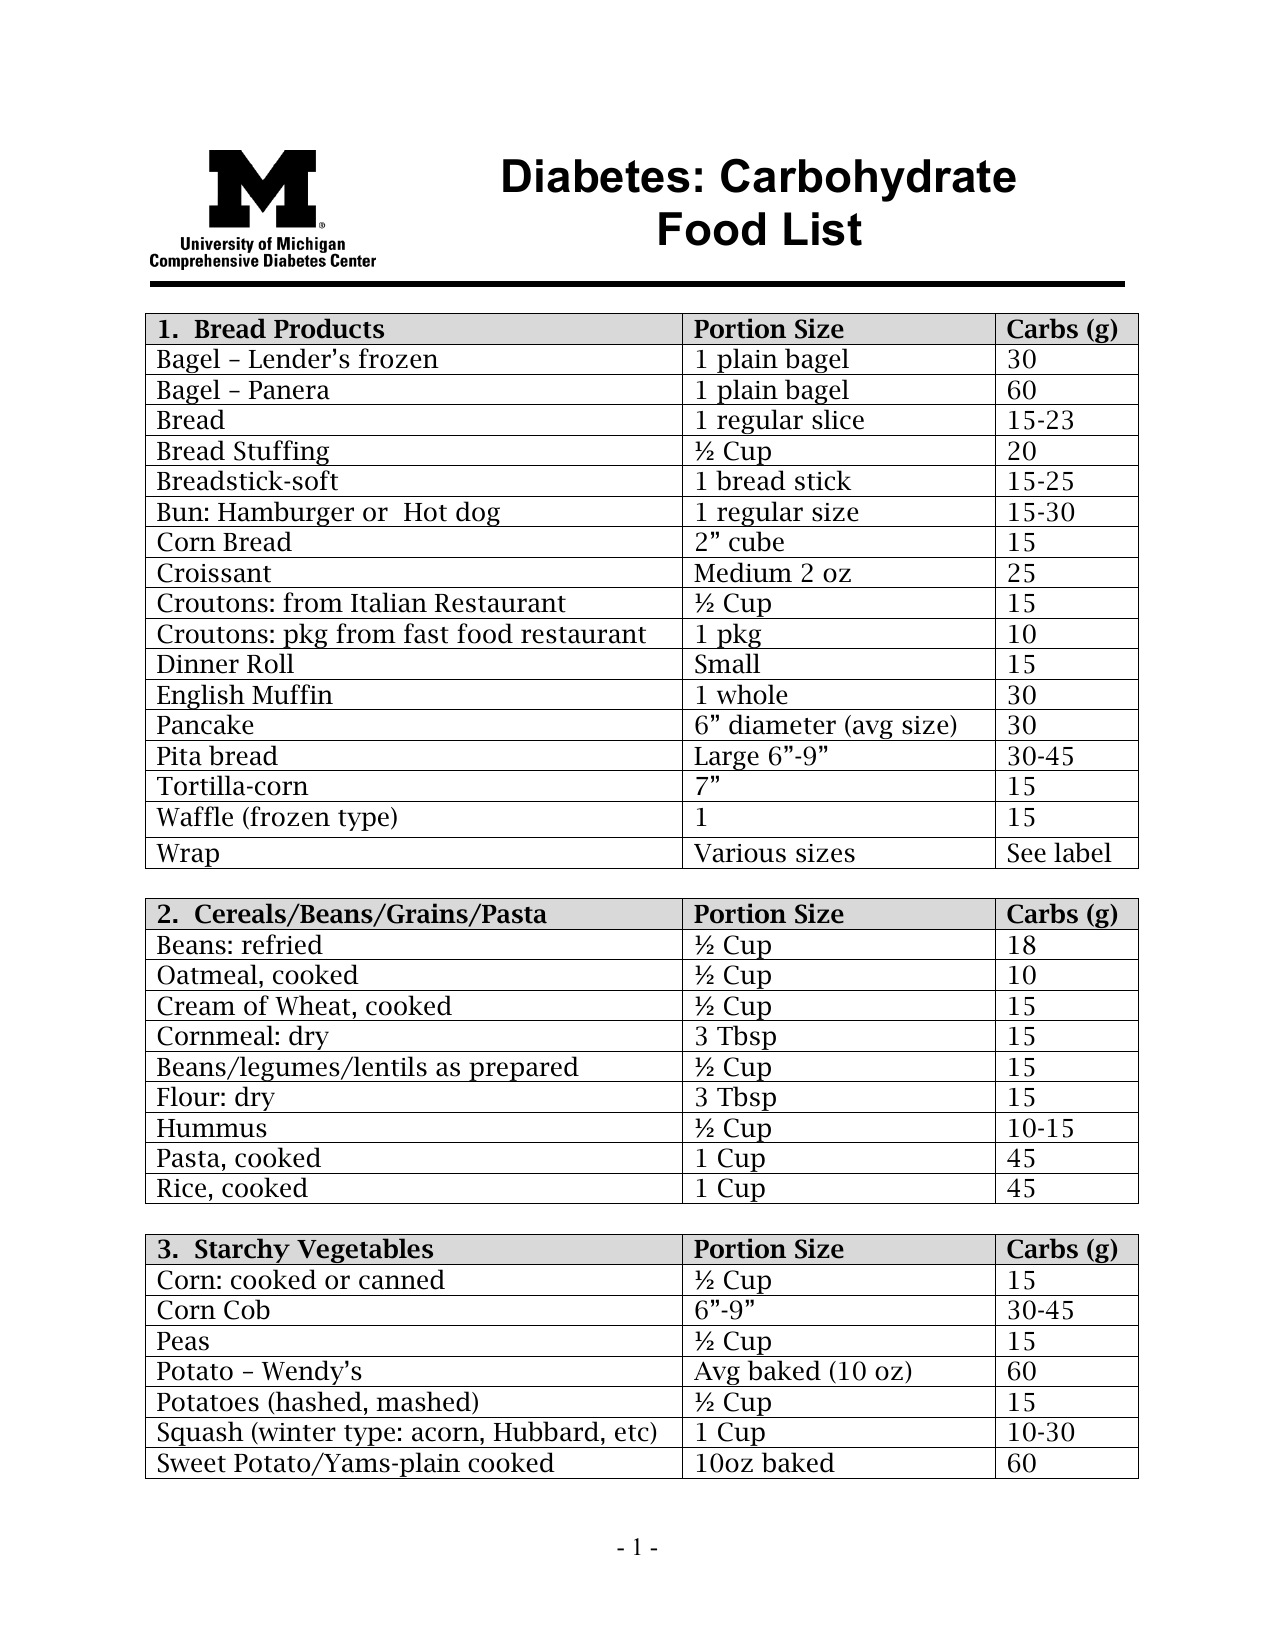 diabetes-carbohydrate-food-list-university-of-michigan-health